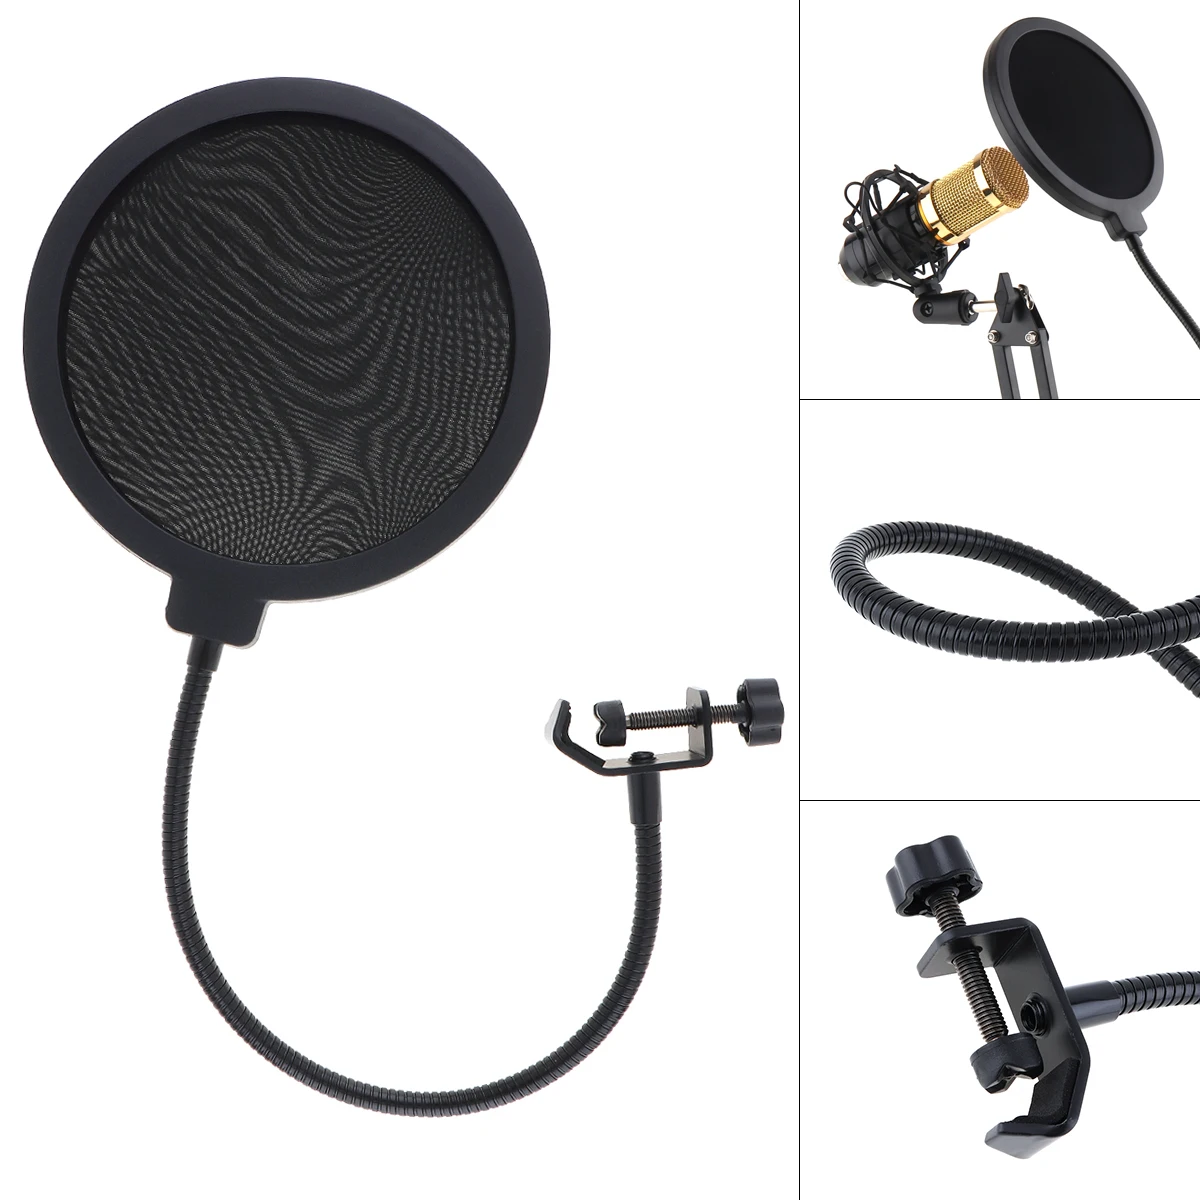 Double Layer Studio Microphone Flexible Wind Screen Sound Filter Mask Mic Pop Filter Shield for Speaking Podcast Accessories